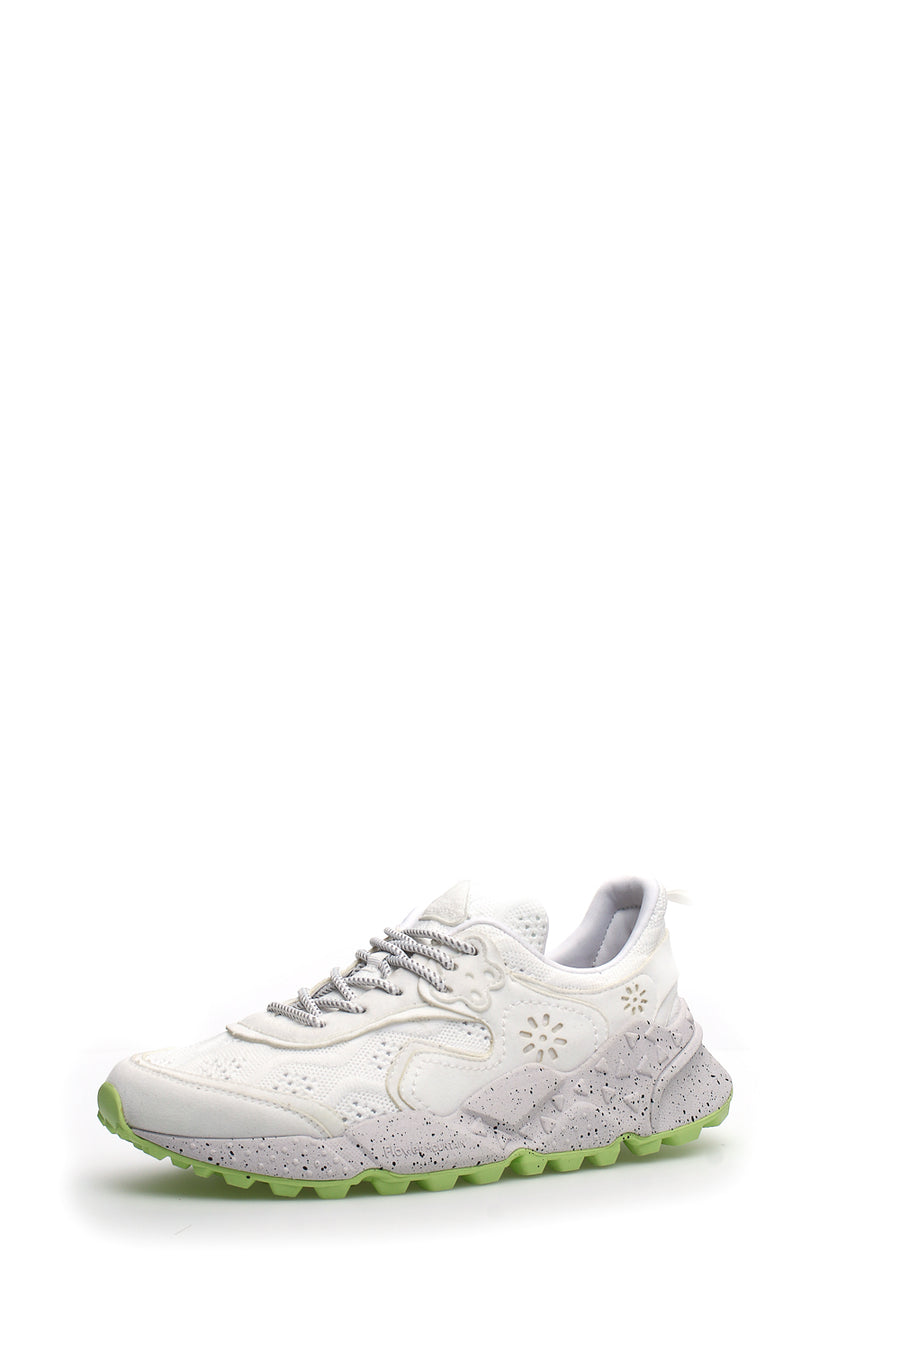 Buy the Flower Mountain Kotetsu Eco Suede/Eco Nylon Sneaker in White at Intro. Spend £50 for free UK delivery. Official stockists. We ship worldwide.